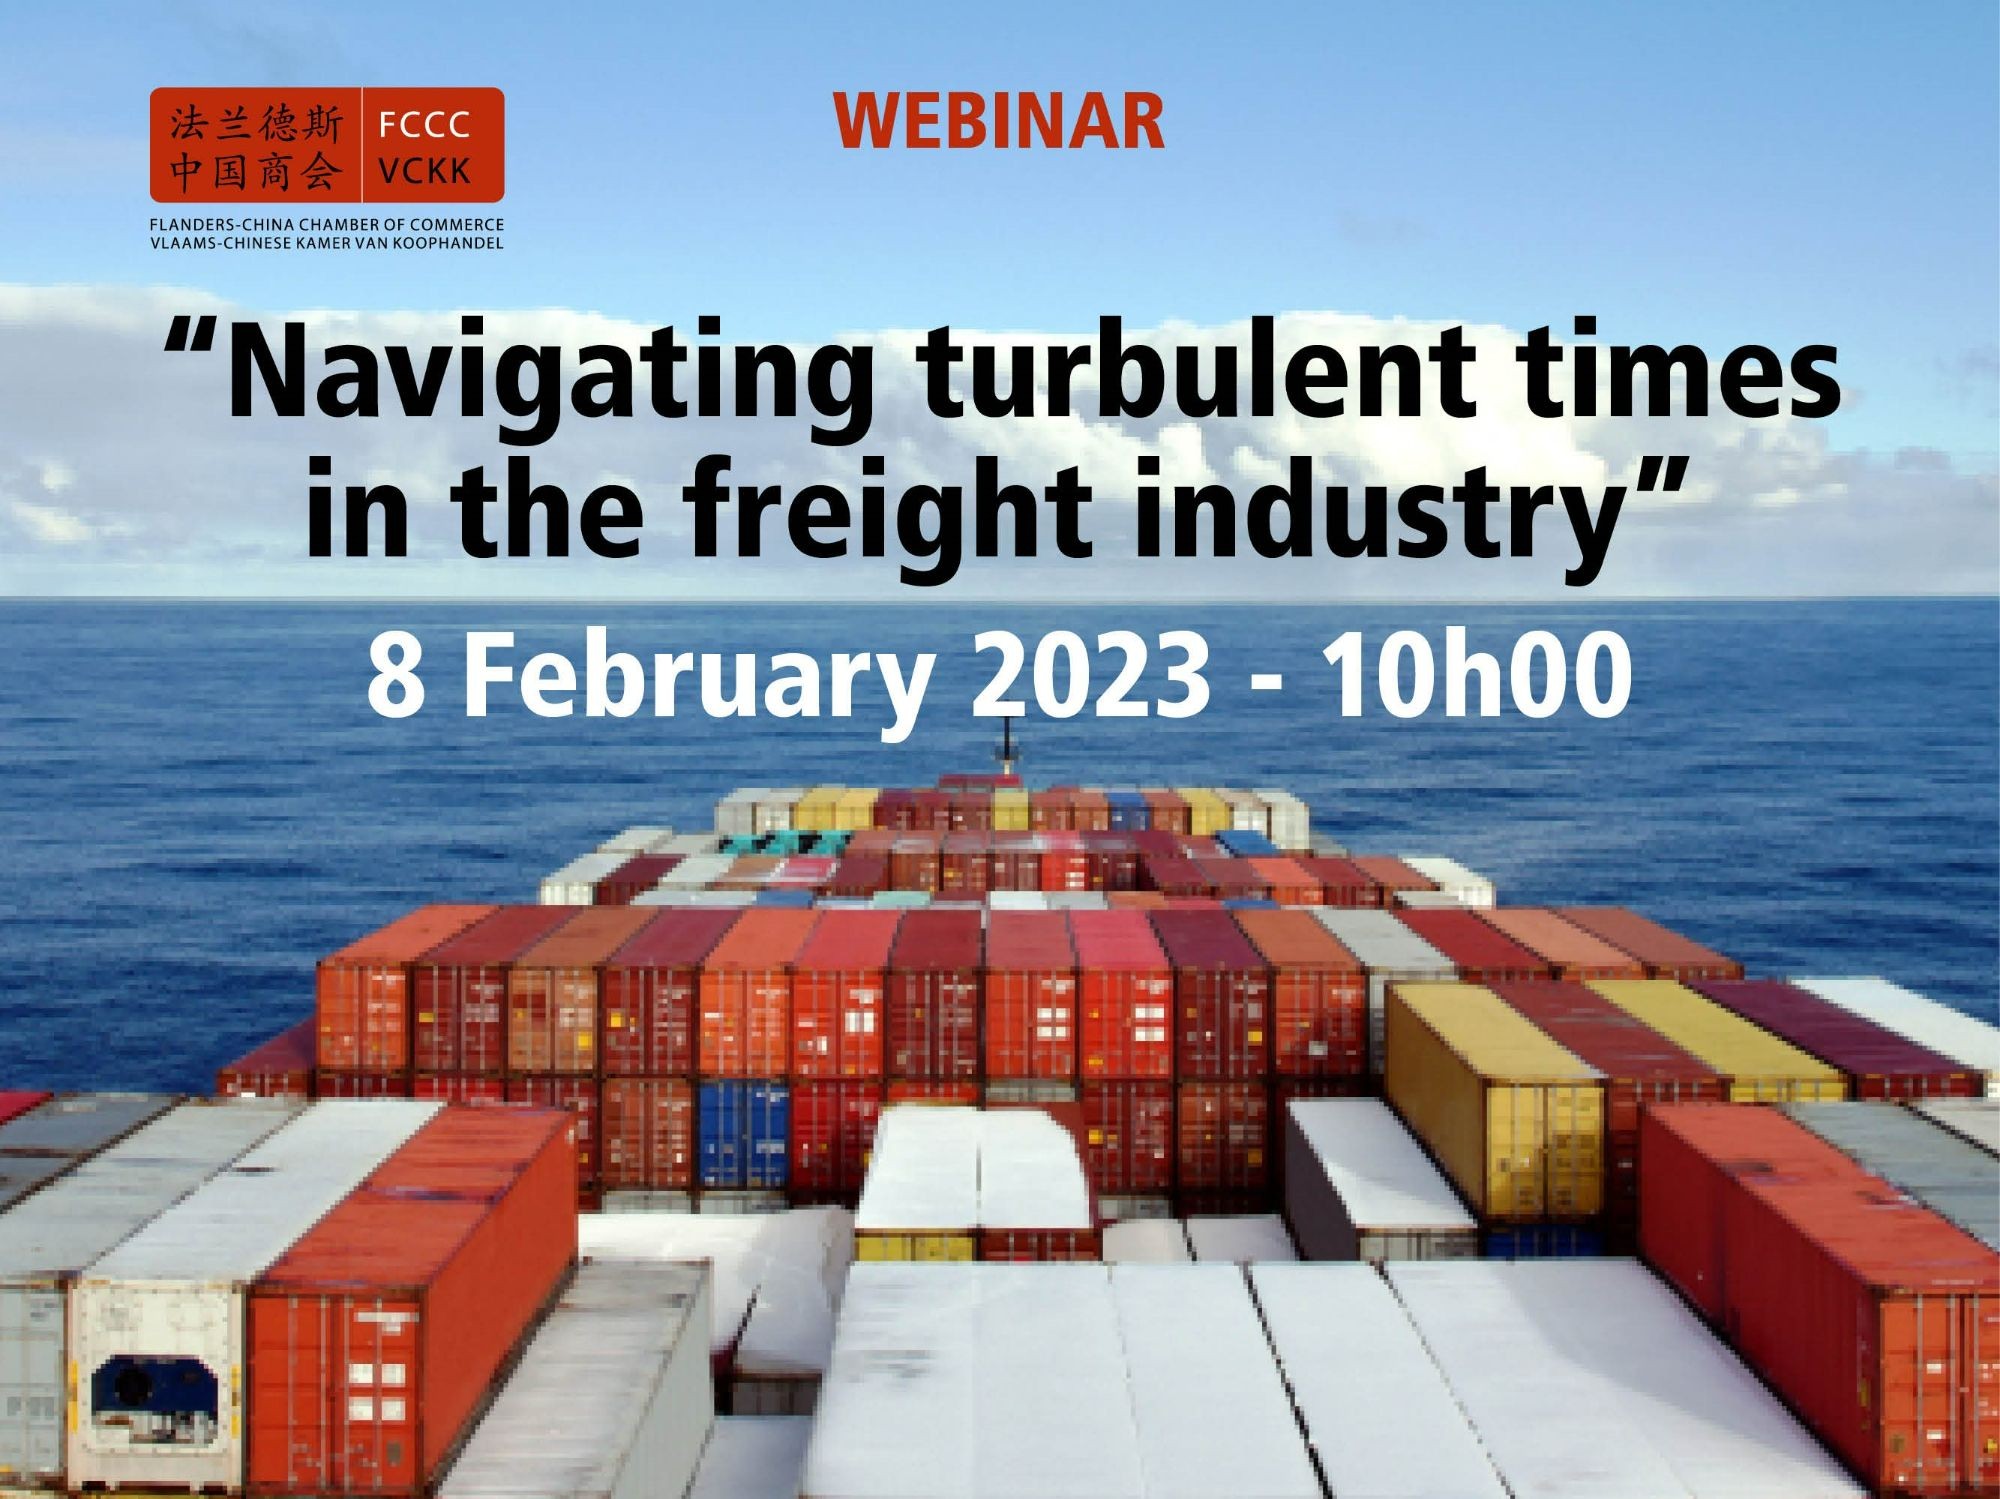 Webinar: Navigating turbulent times in the freight industry -  8 February 2023 - 10h00 CET